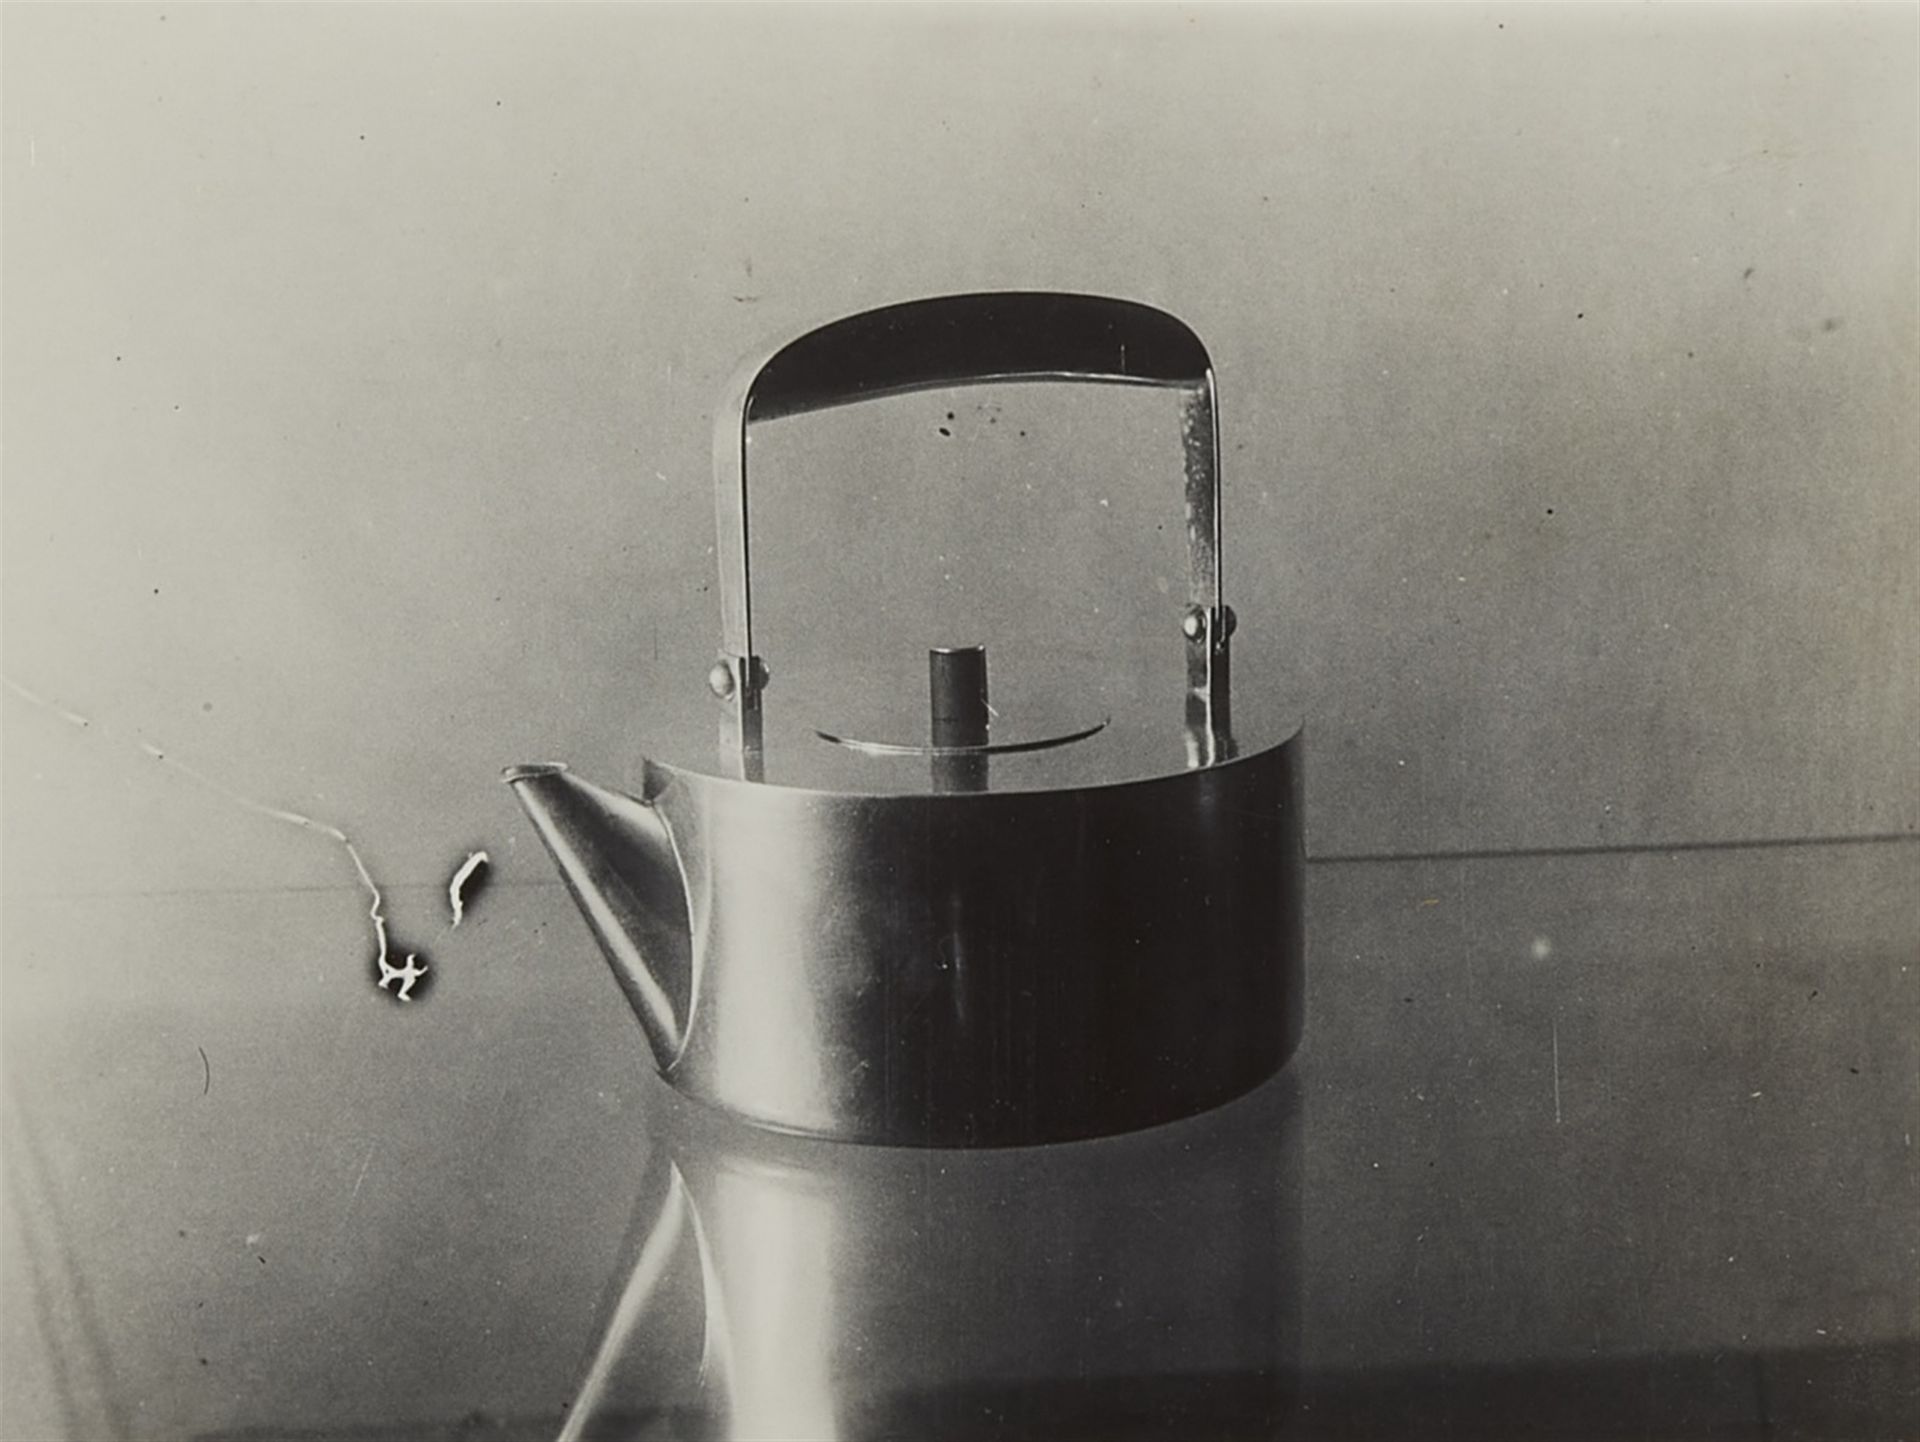 Bauhaus photography<BR>Untitled (Objects from the Metal workshop) - Image 4 of 6